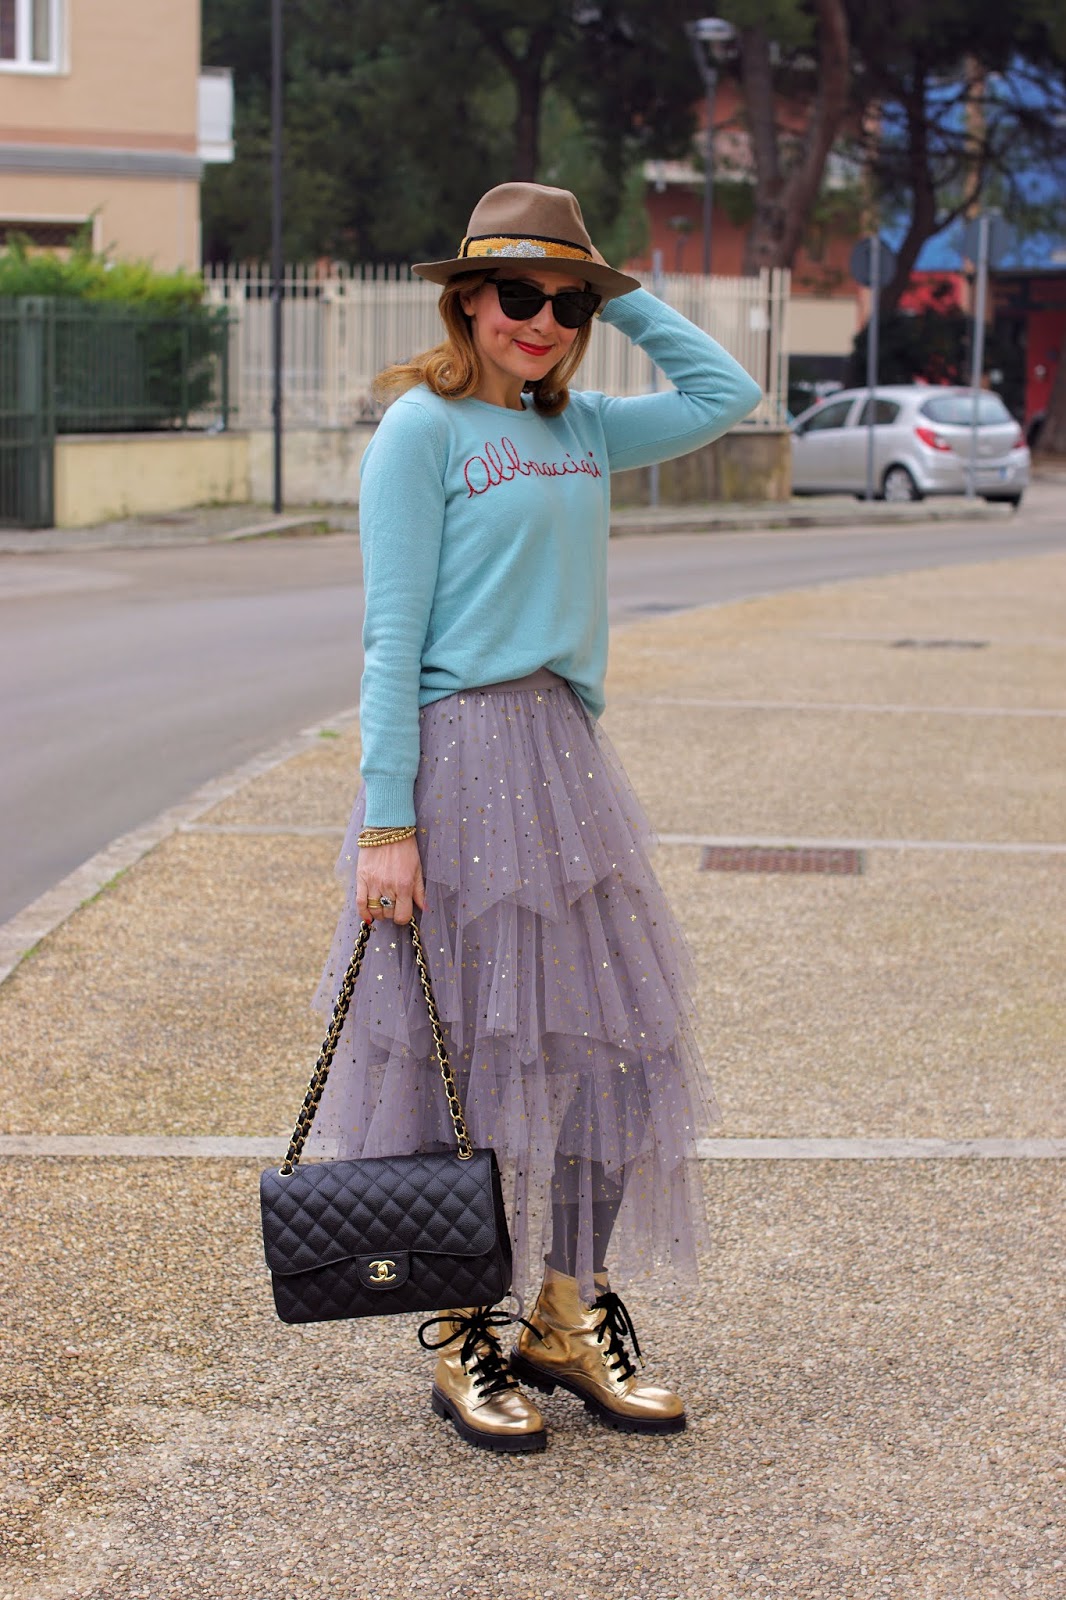 Tulle skirt and Combat boots outfit idea on Fashion and Cookies fashion blog, fashion blogger style